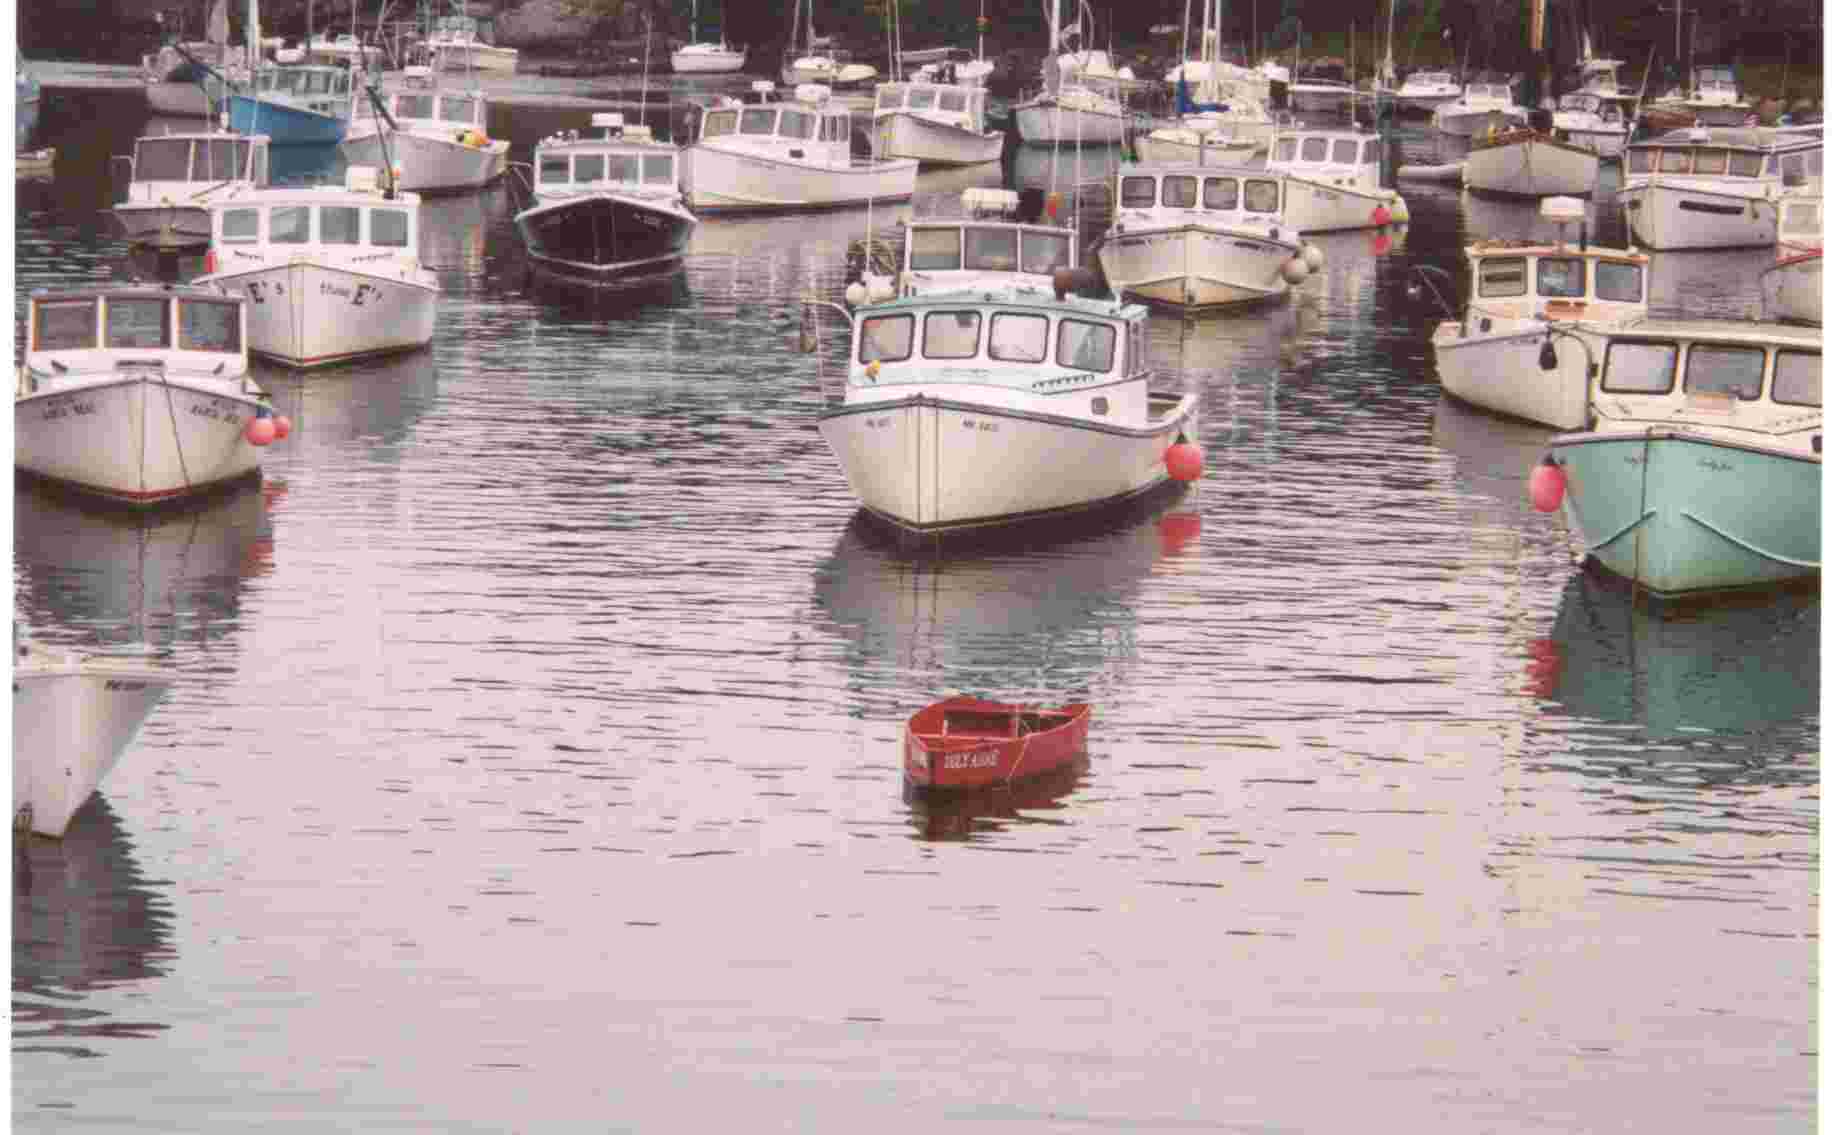 Boats in Harbor (user submitted)